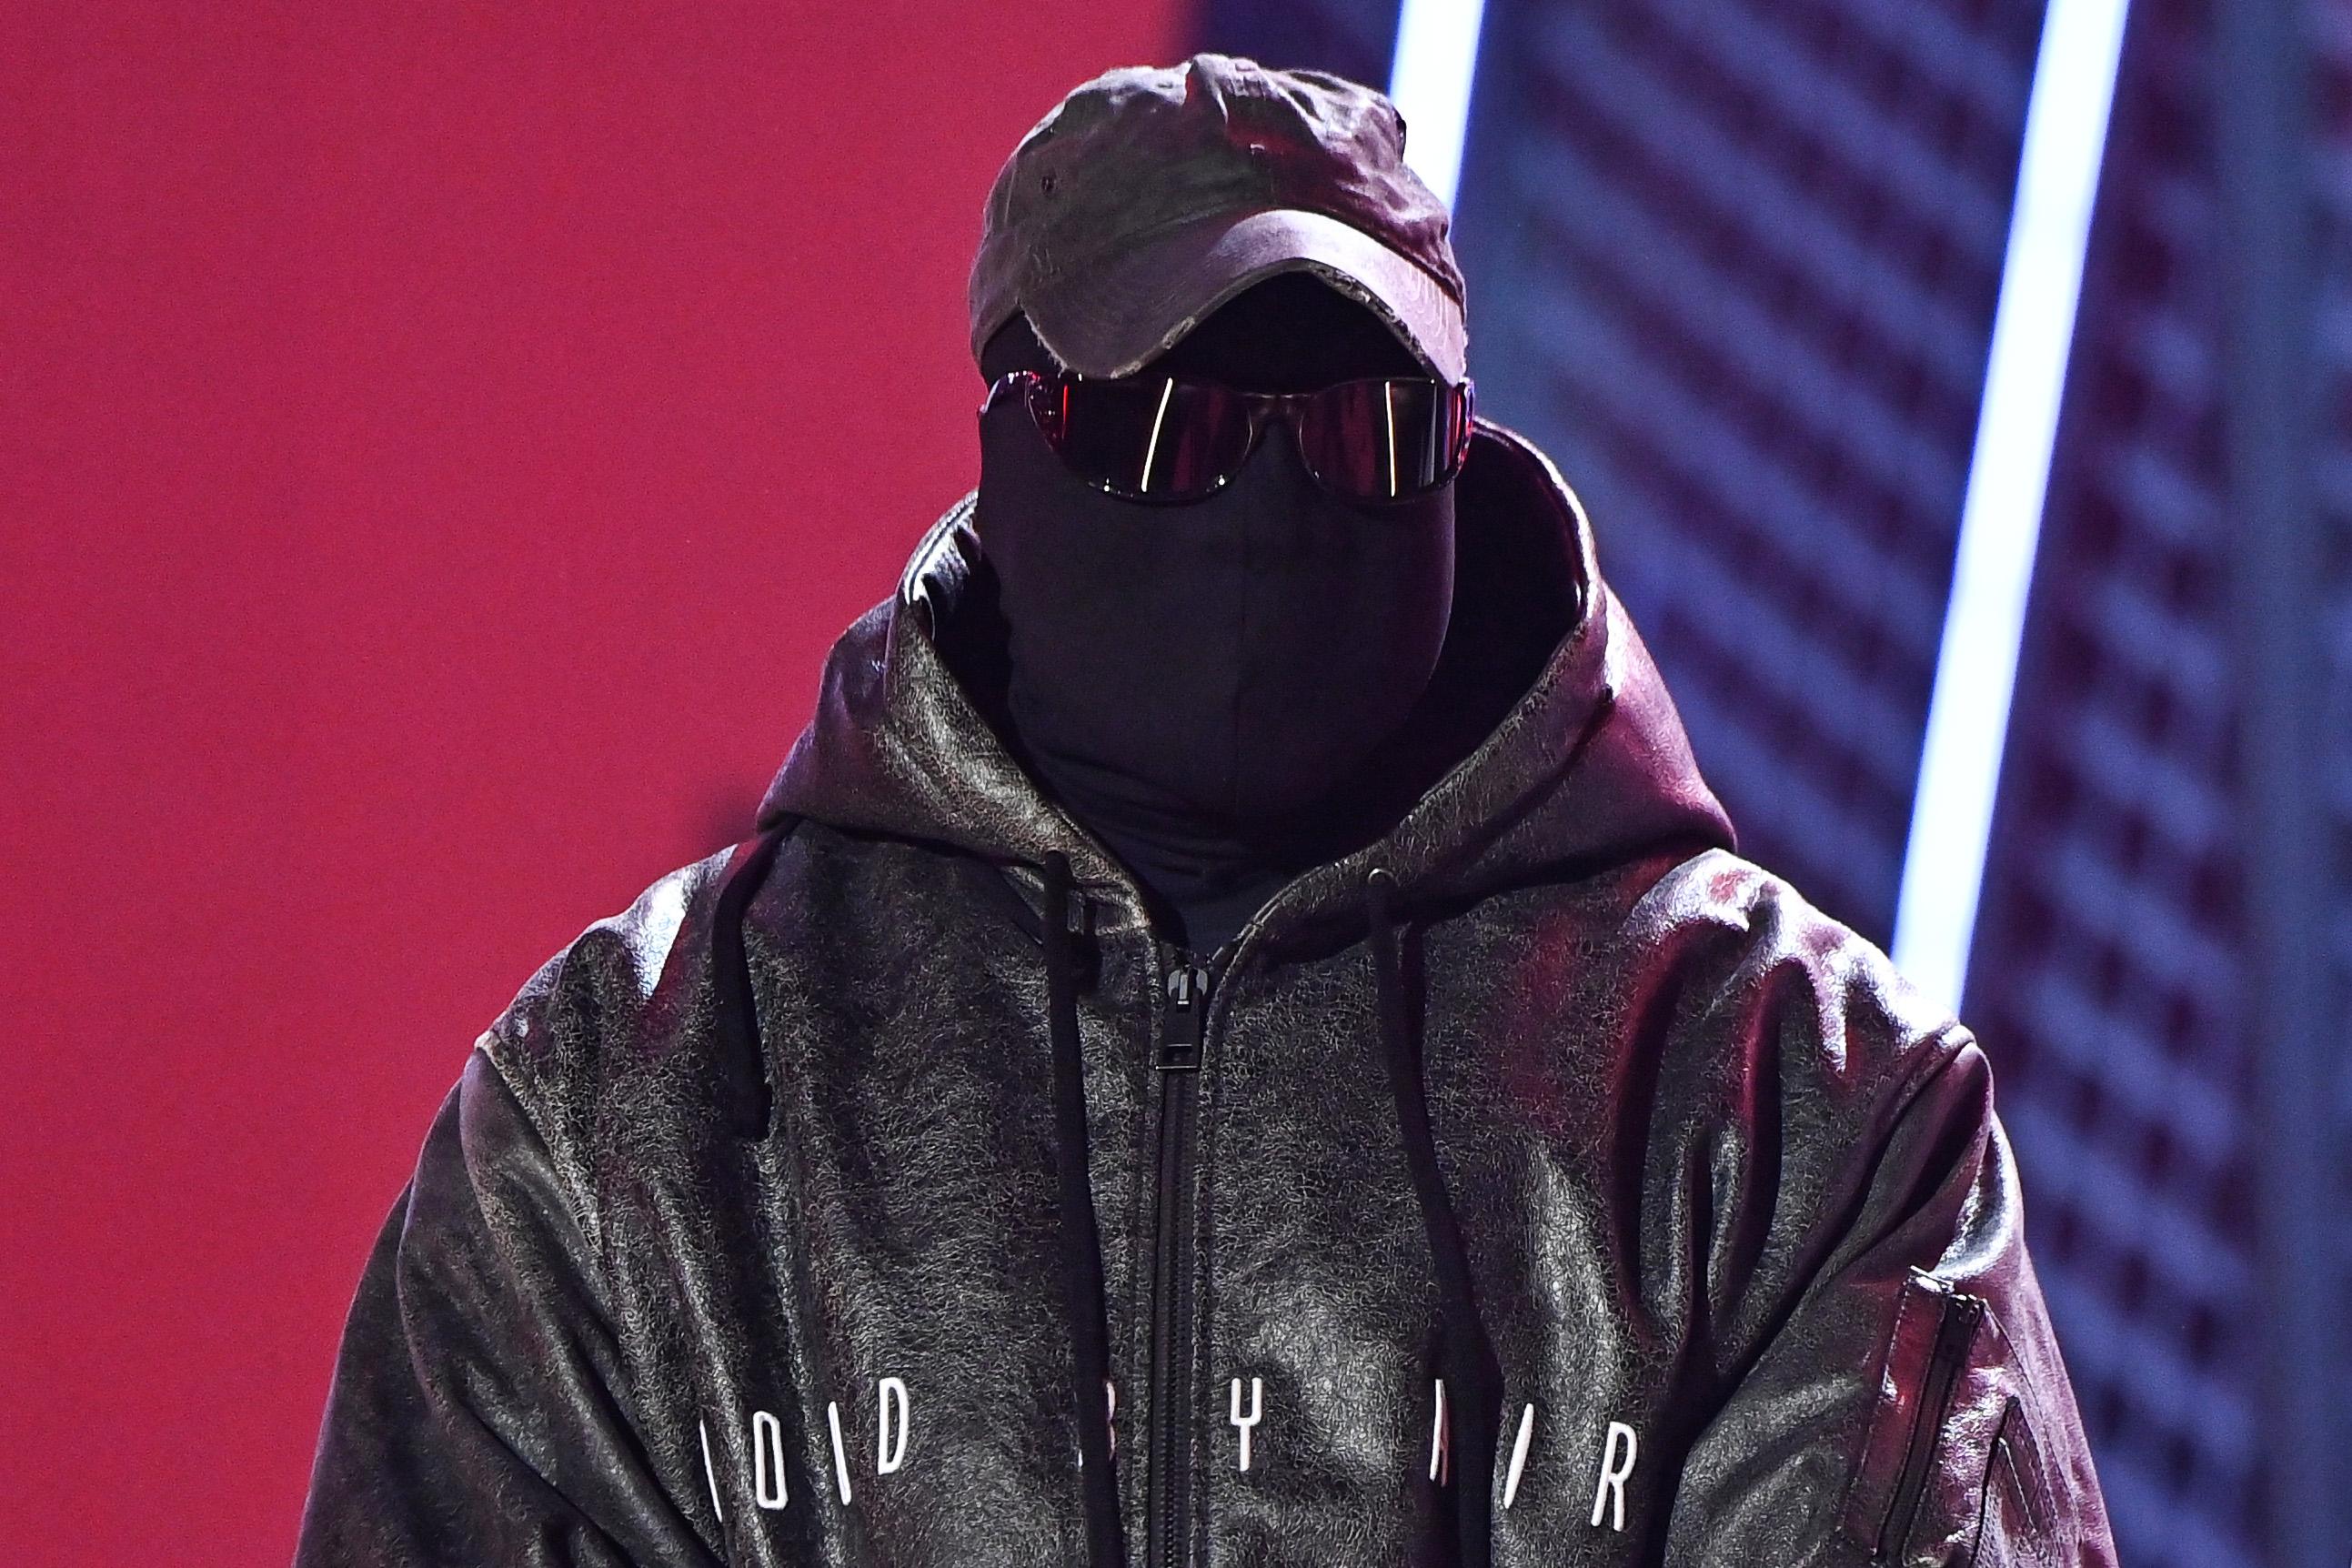 Kanye "Ye" West in a hoodie, face mask, cap, and sunglasses